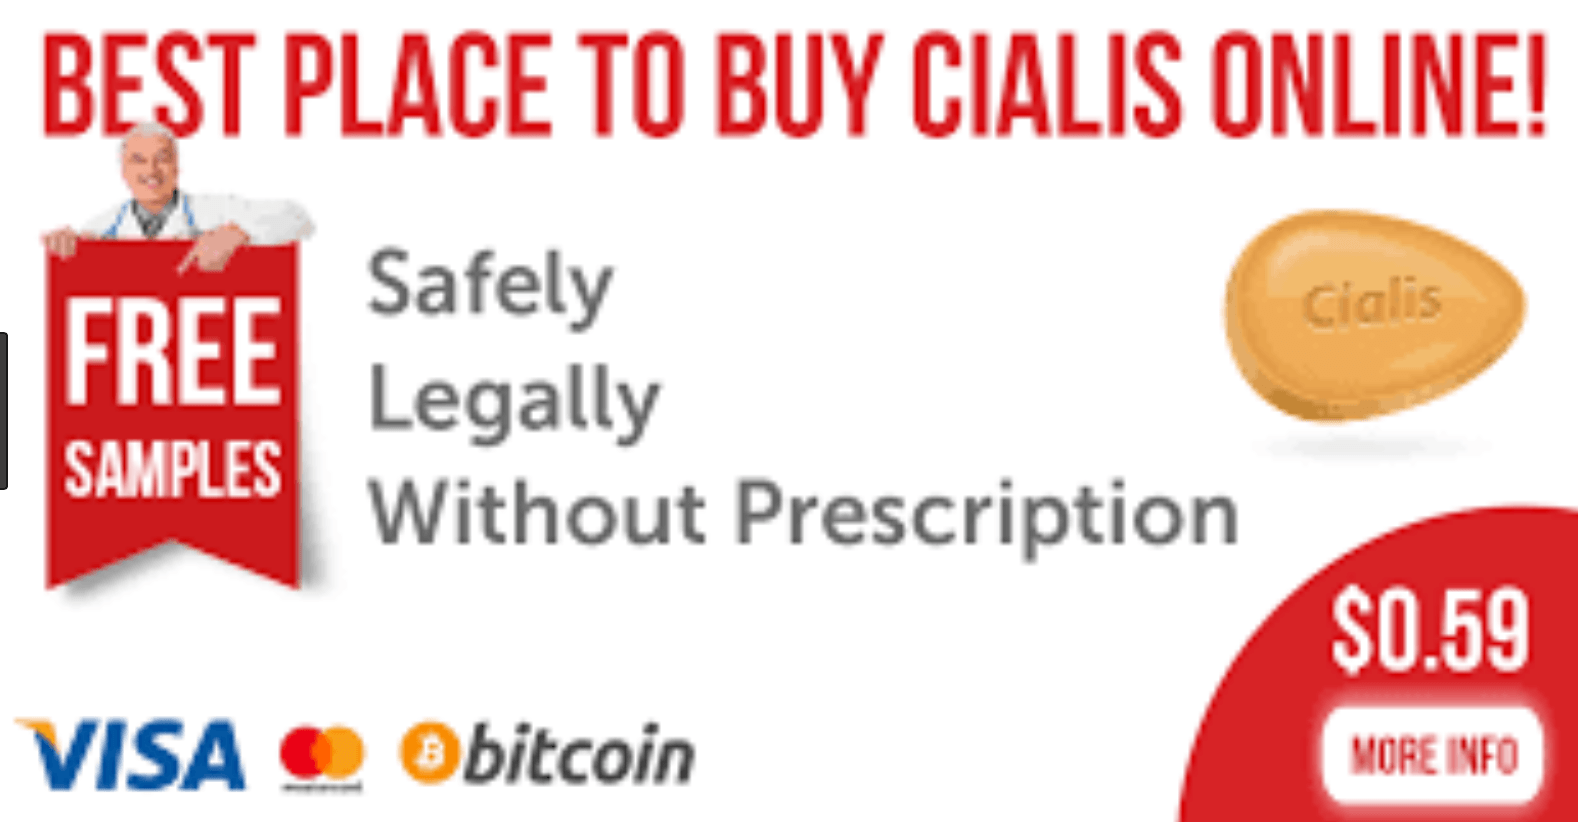 Finding Cialis 20mg For Sale at Major Pharmacies or Online Drugstores ...